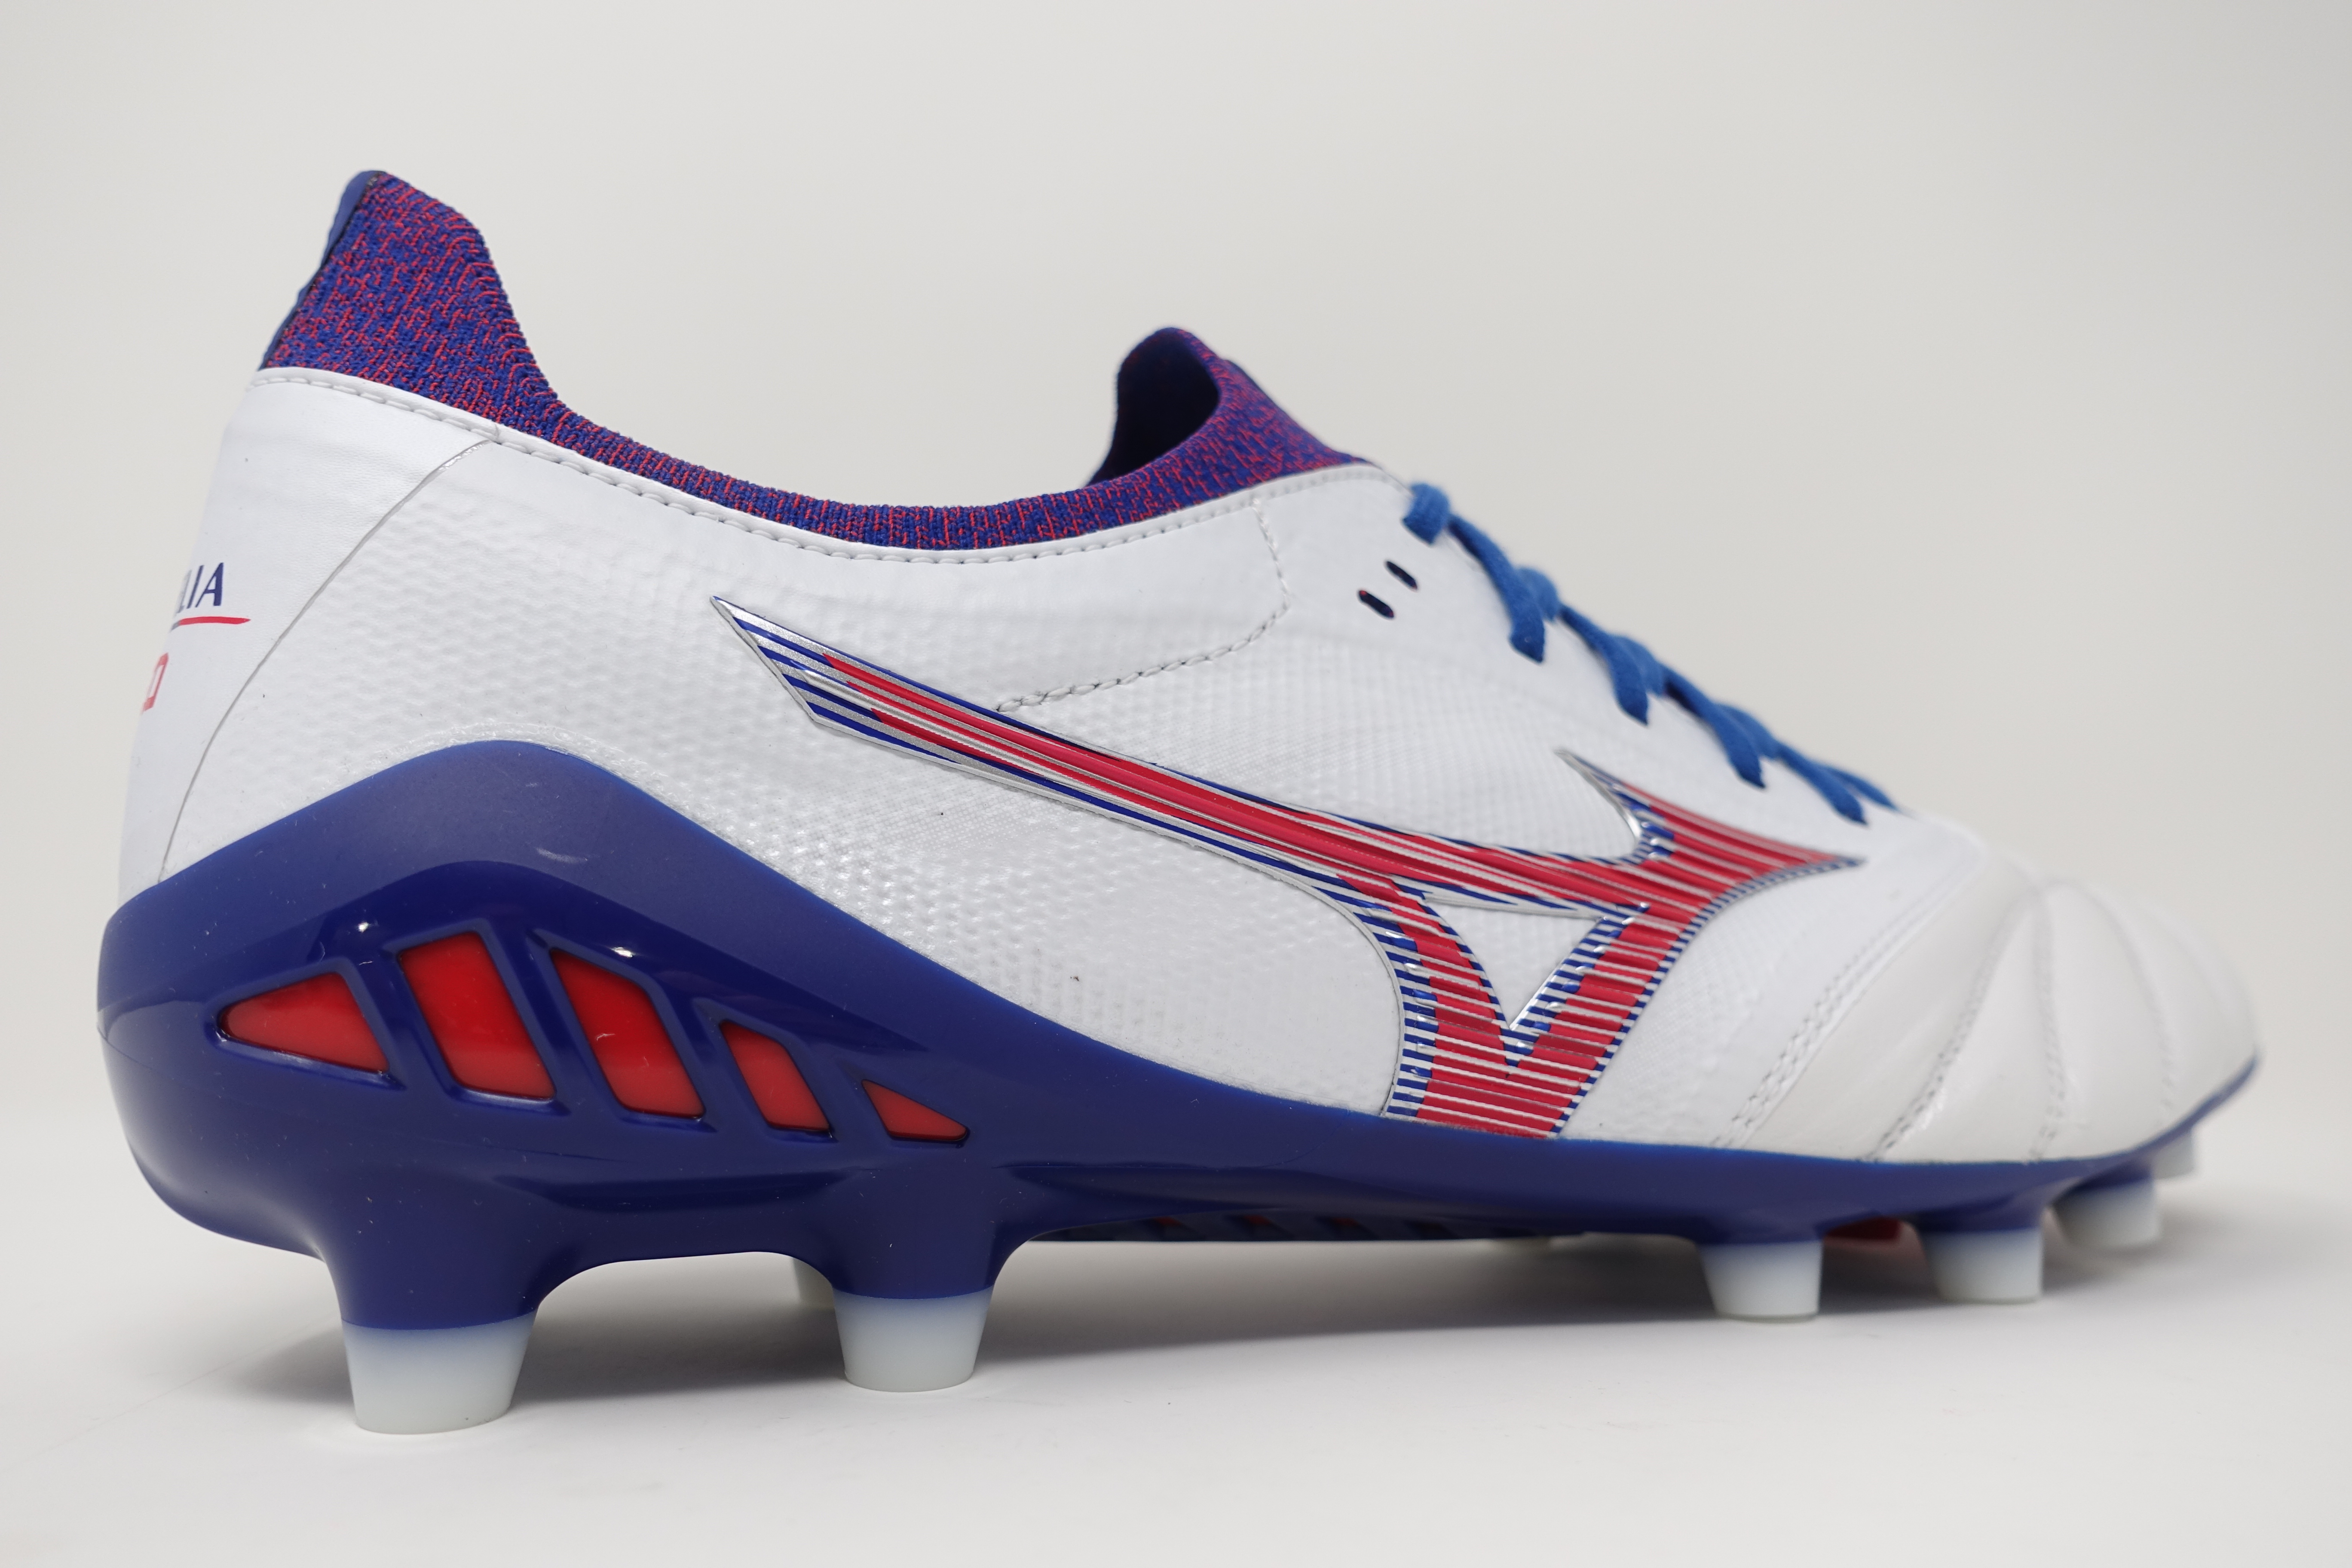 Mizuno-Morelia-Neo-3-Made-in-Japan-Next-Wave-Pack-Soccer-Football-Boots-10